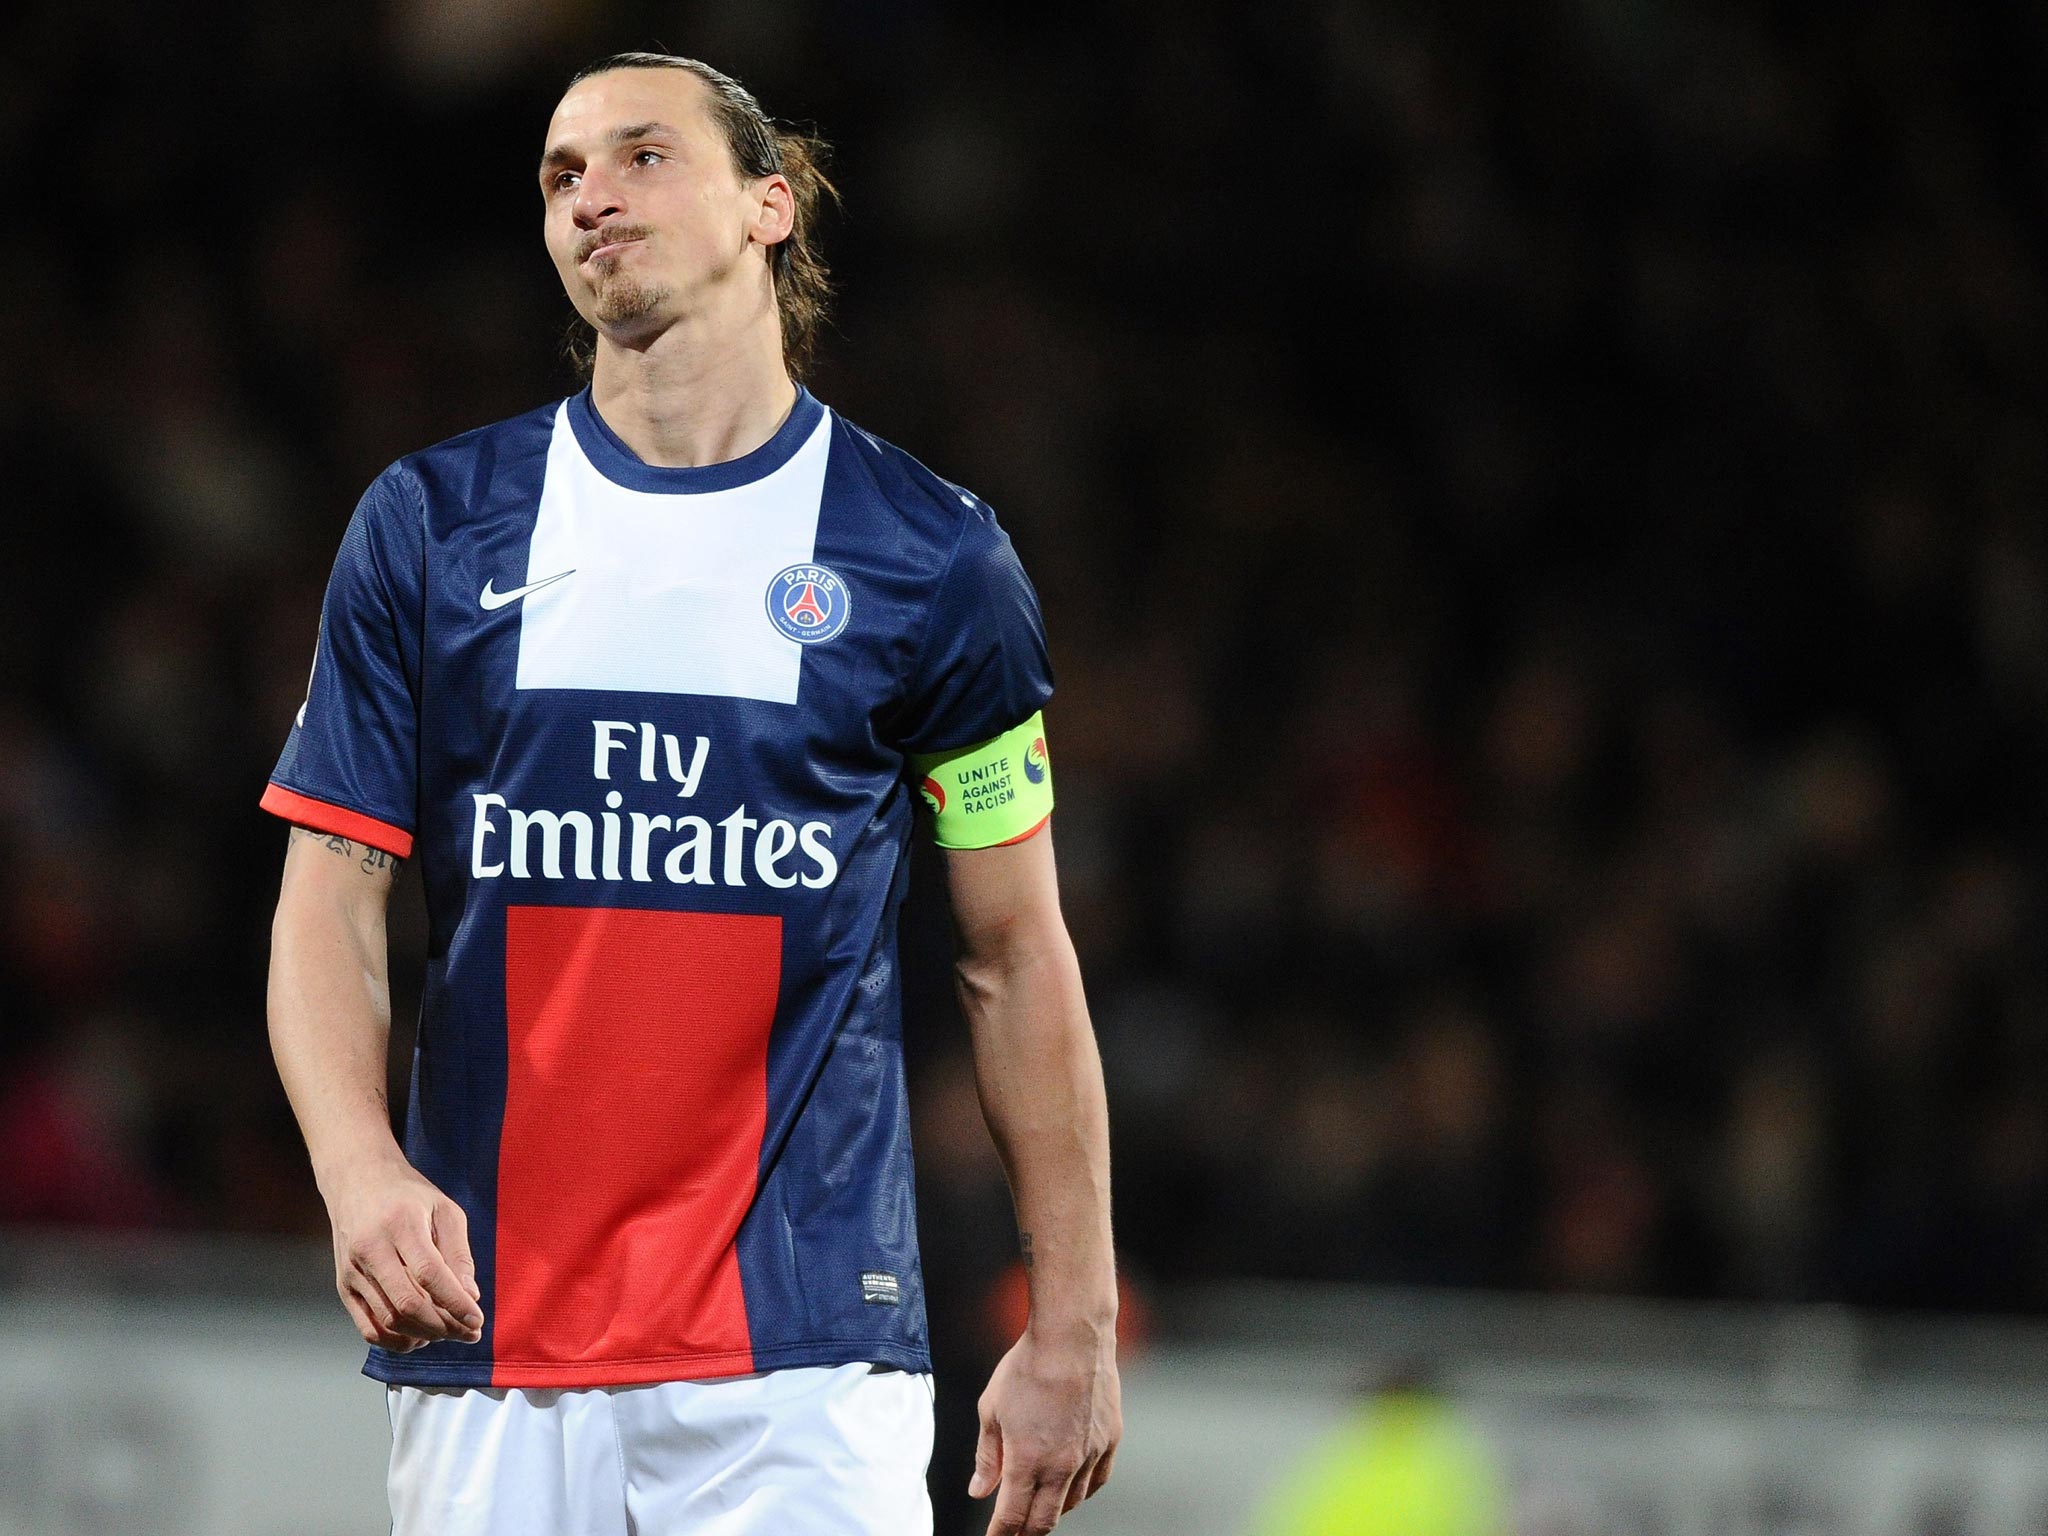 QPR are said to have turned down the chance to sign Zlatan Ibrahimovic when he was 16